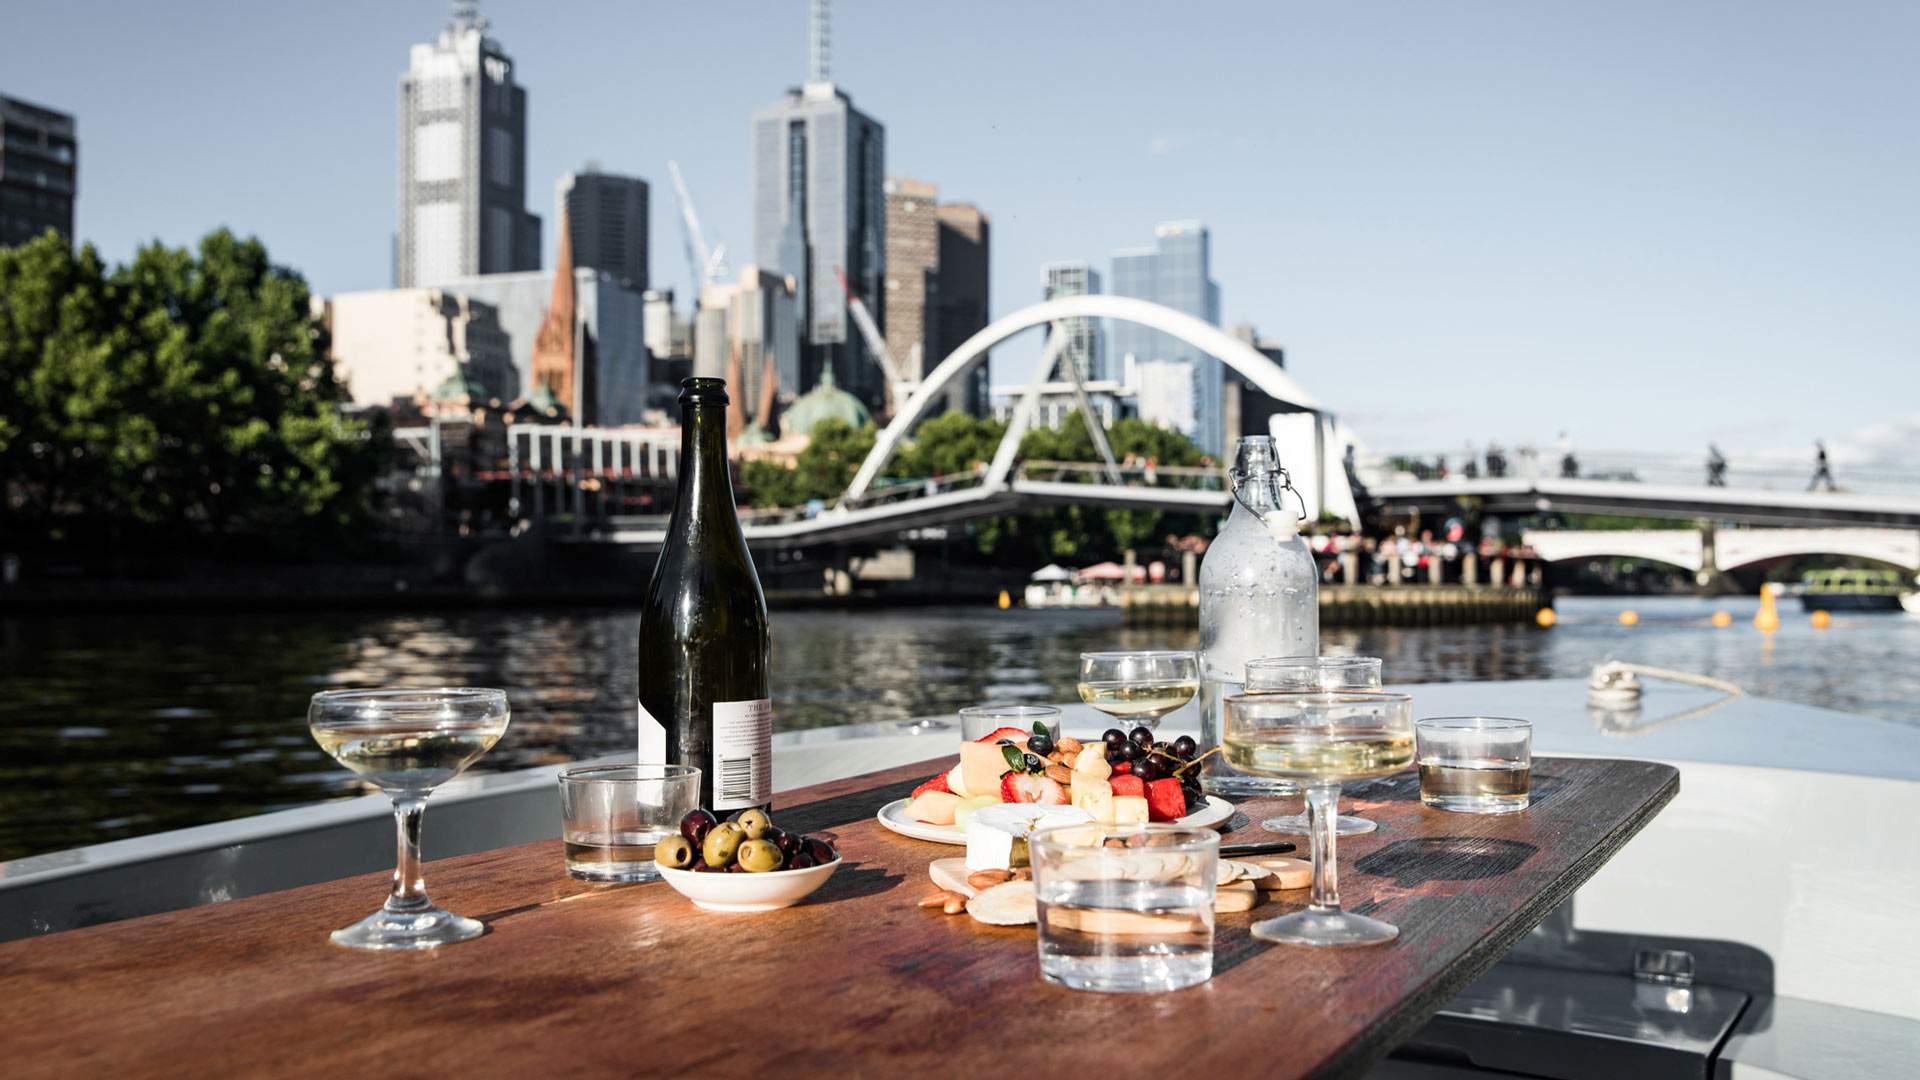 Melbourne's Pet-Friendly BYO Picnic Boats Are Now Setting Sail From the CBD